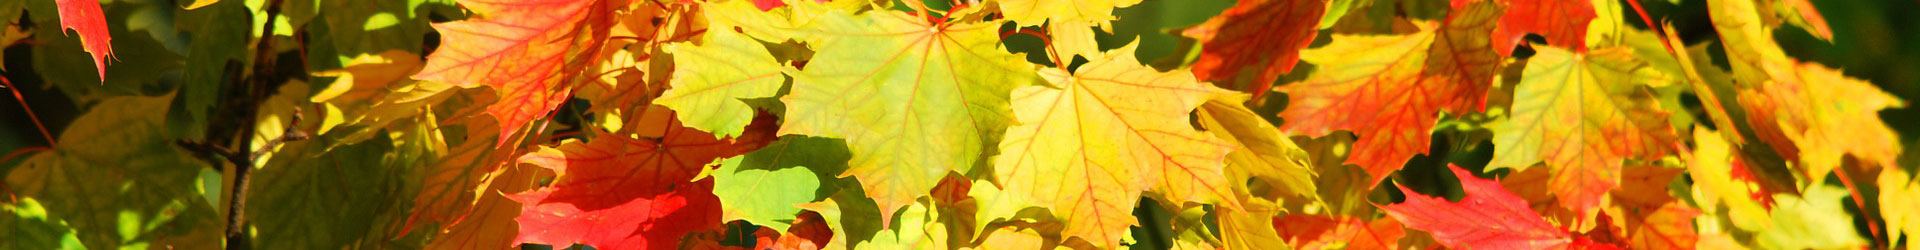 Fall maple leaves: red, yellow and green.